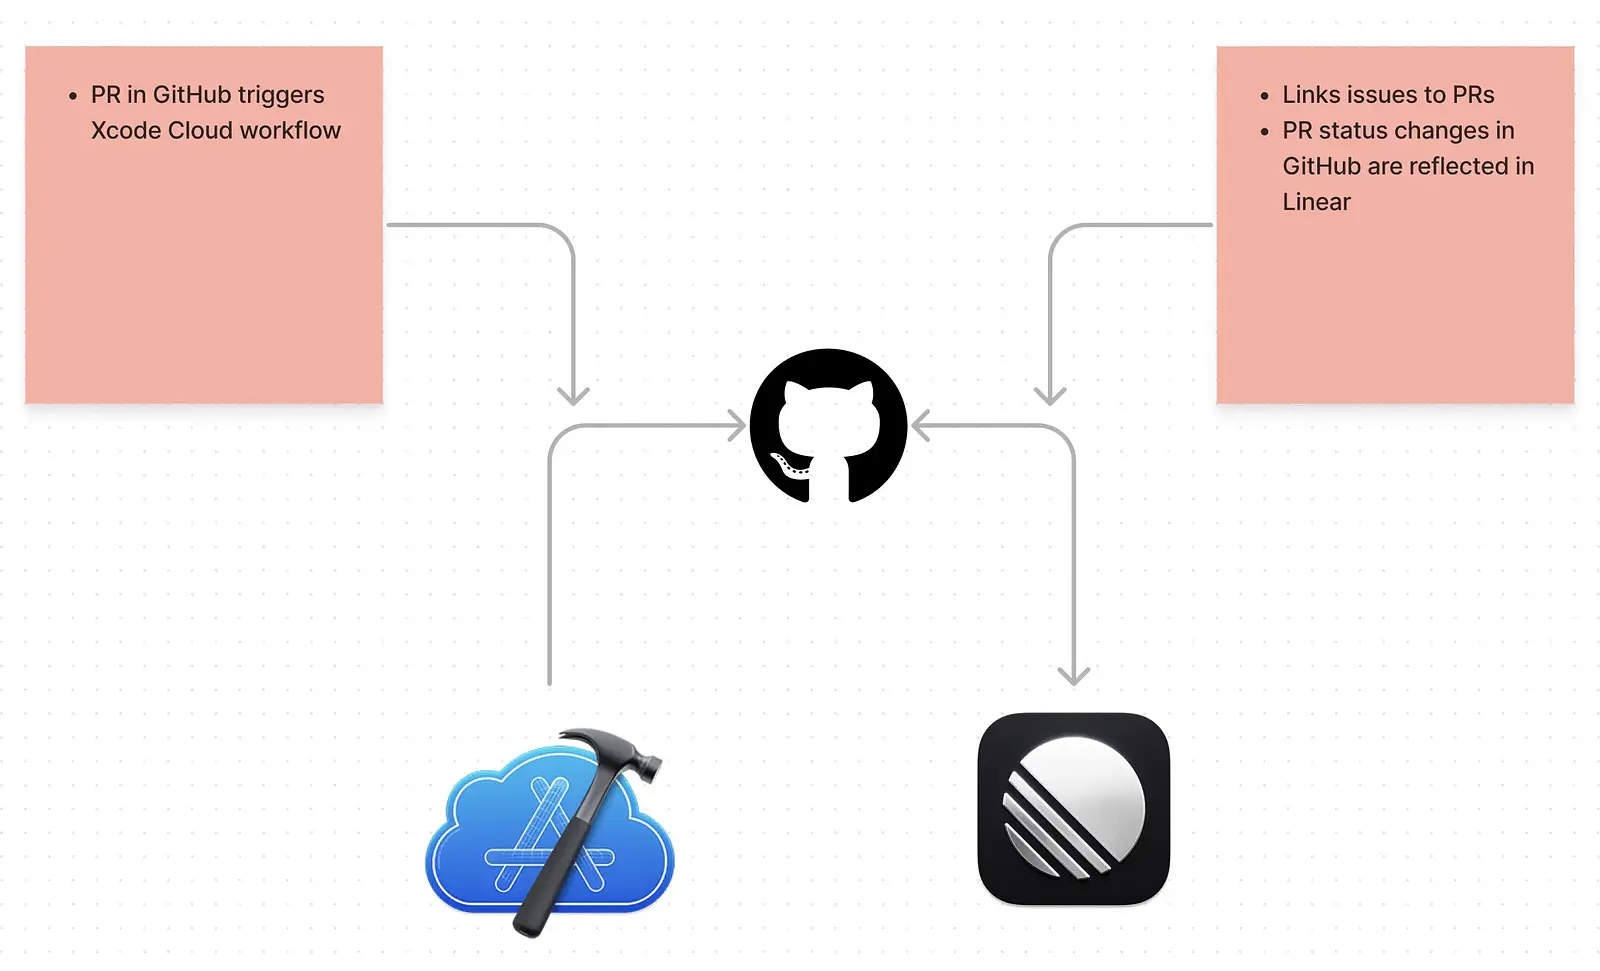 A diagram showing the connections between GitHub, Xcode Cloud, and Linear.